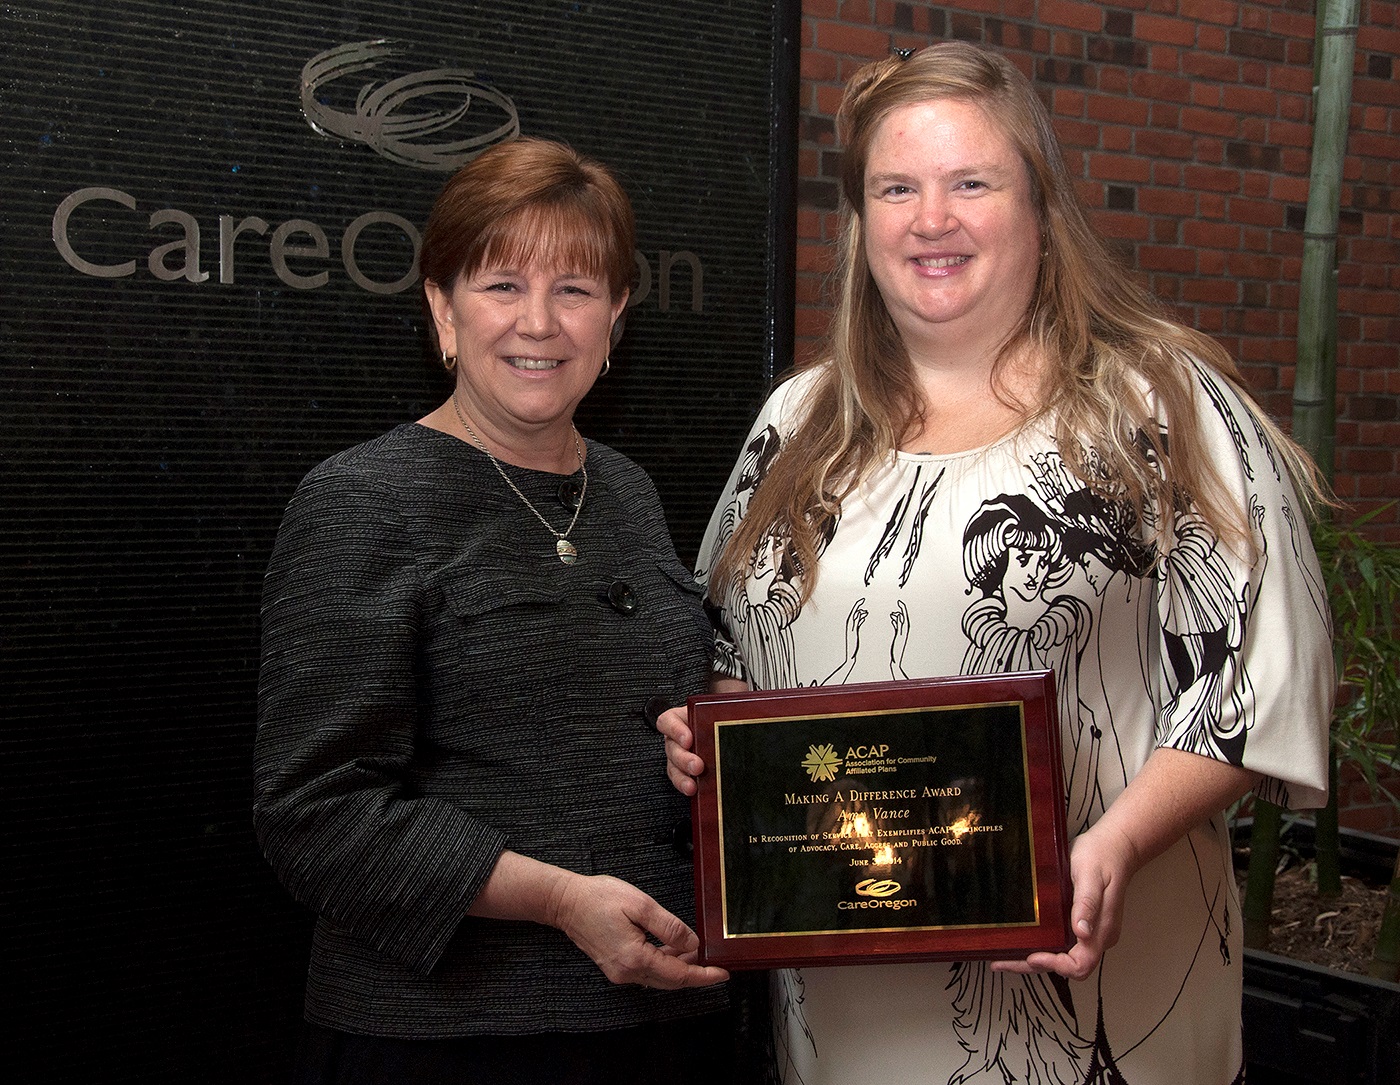 Amy Vance of CareOregon named 2014 winner of ACAP's Making a Difference Award